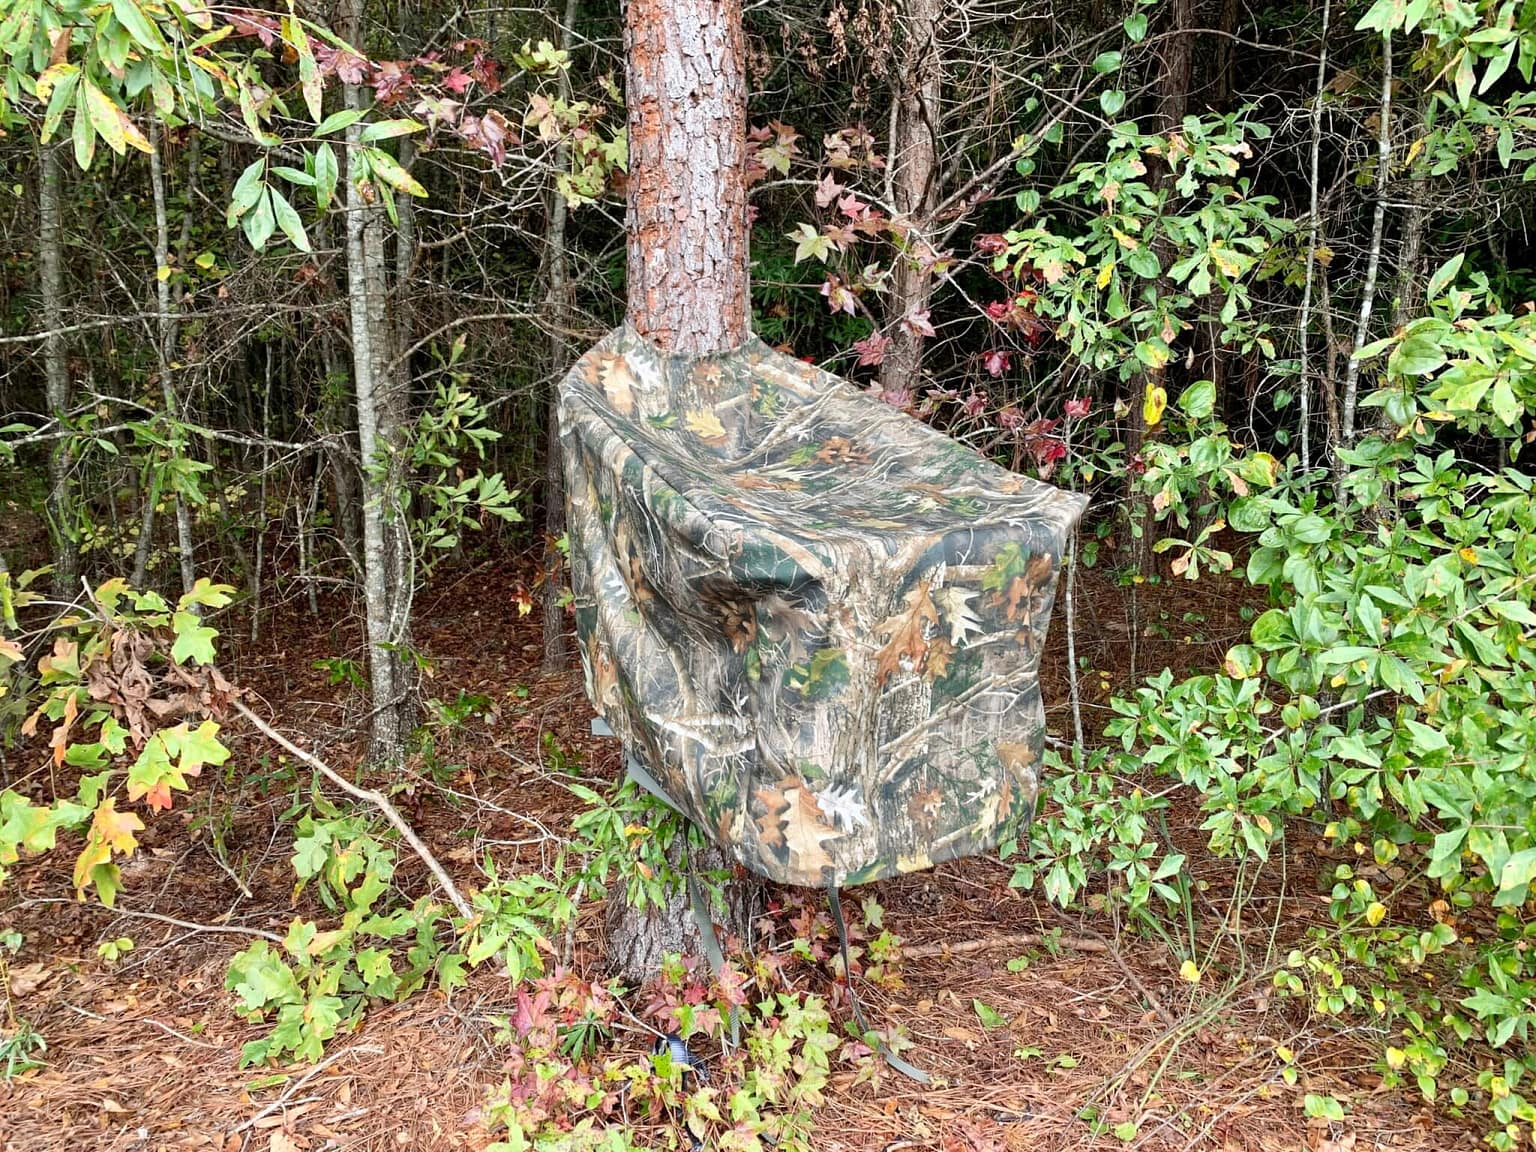 Camo Climber Cover in use on a tree